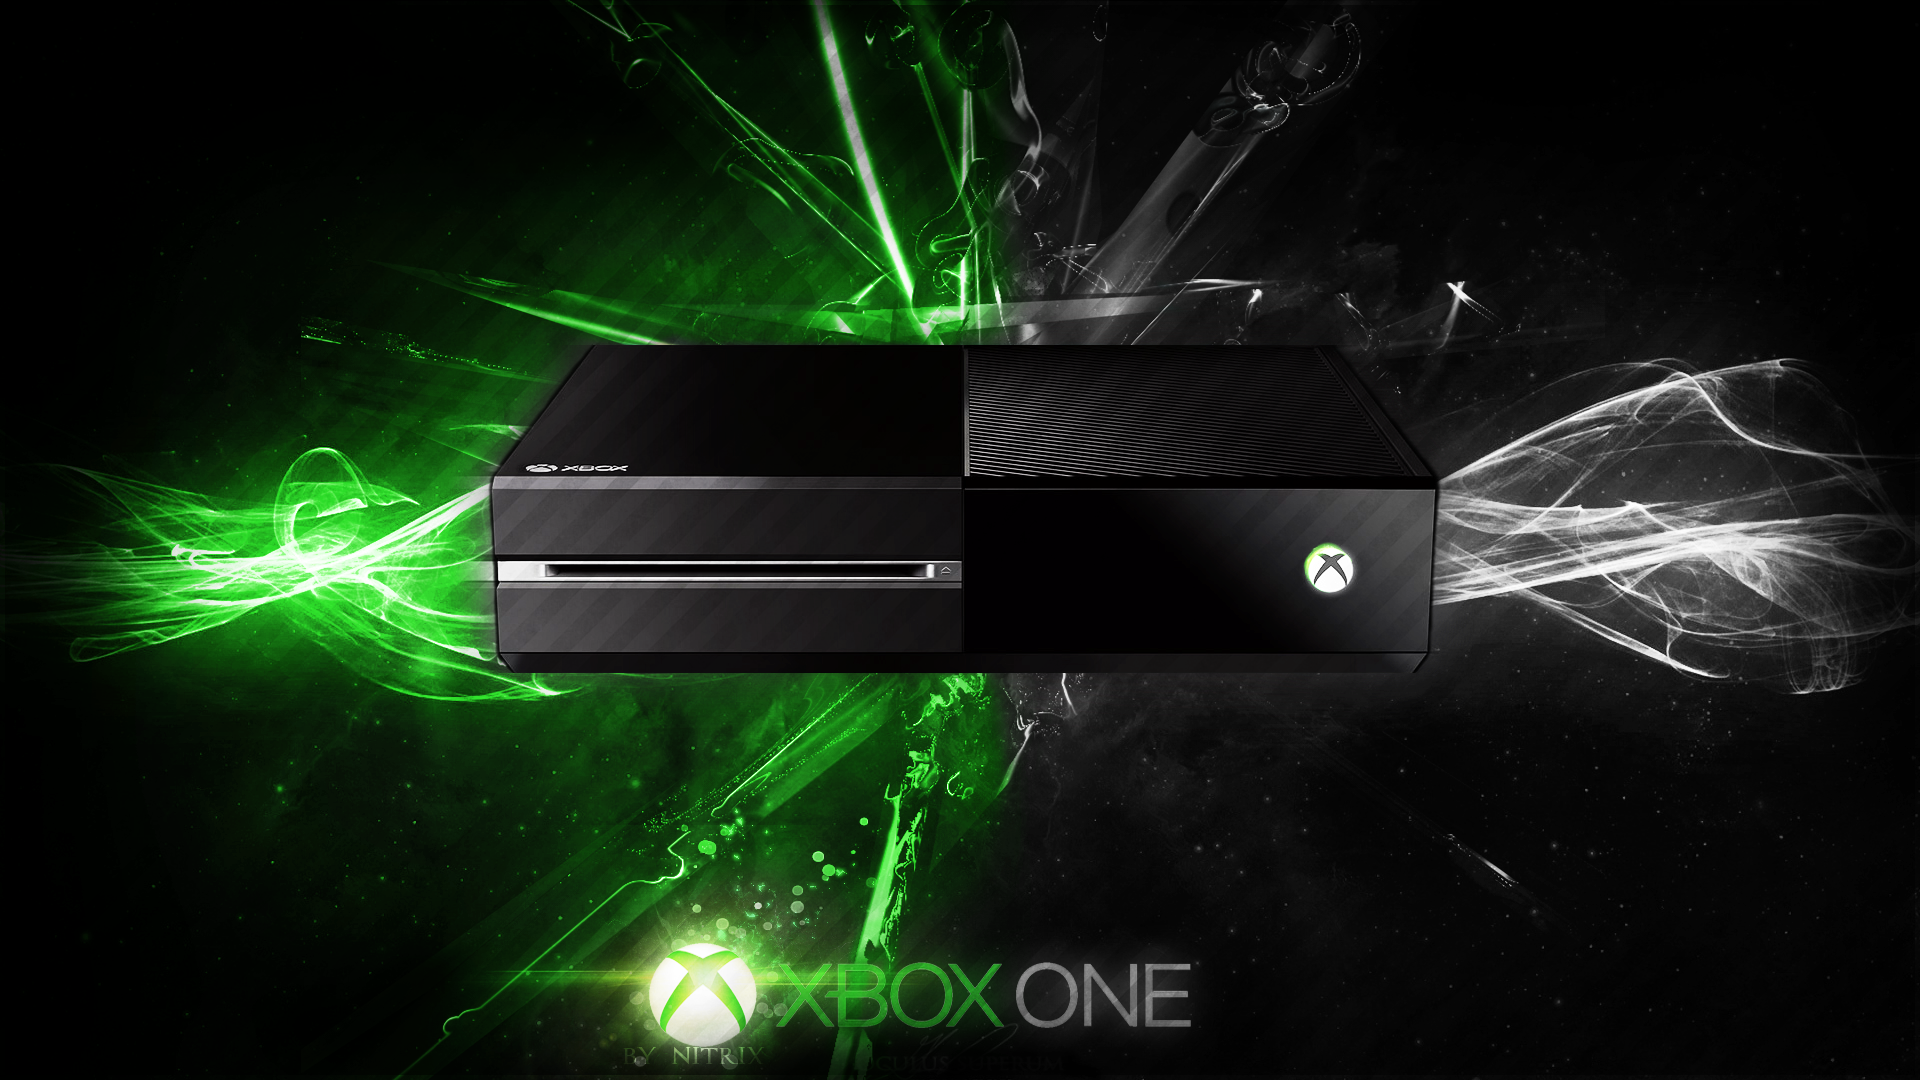 abstract_xbox_one_wallpaper_by_nitr1x-d6